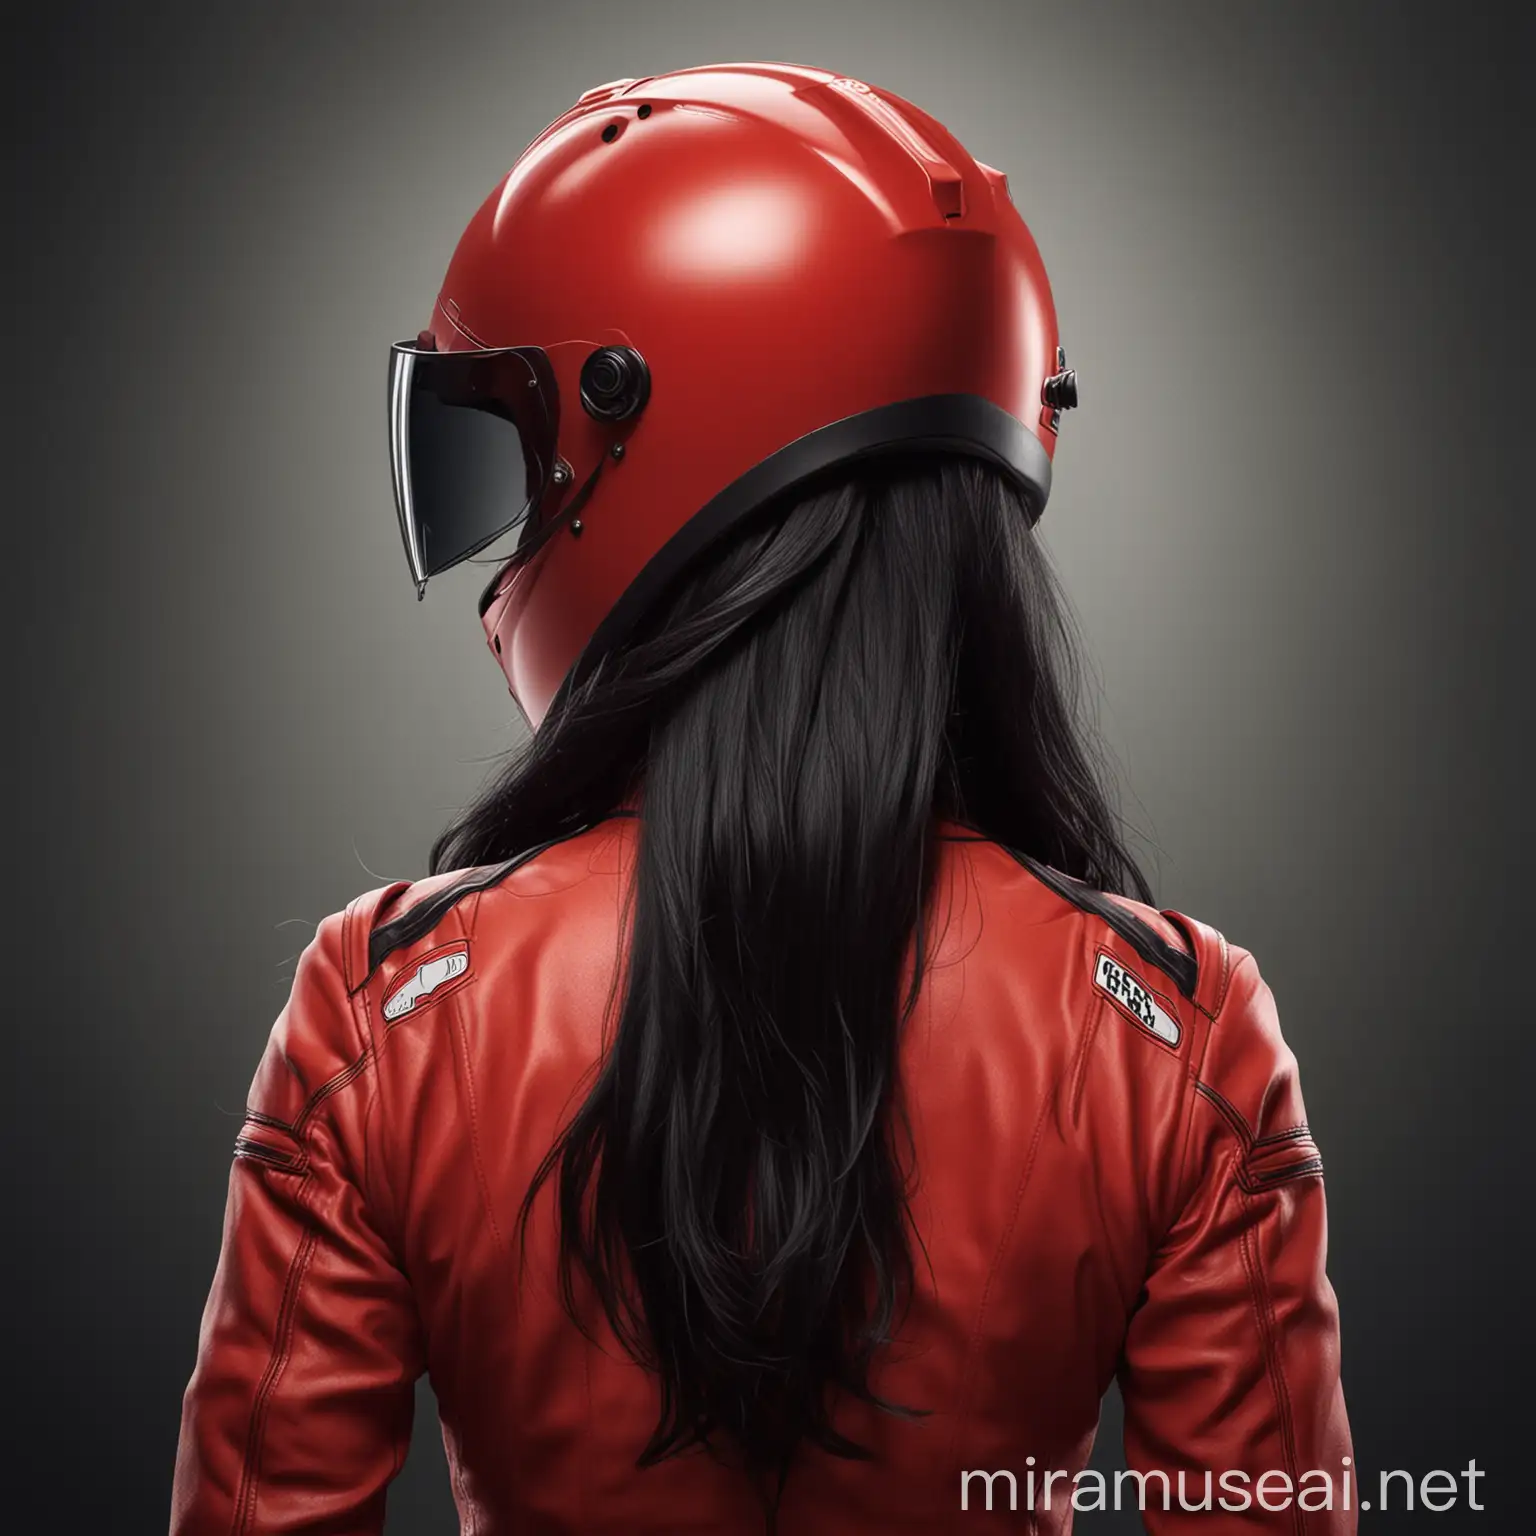 Woman in Red Race Suit and Helmet with Long Black Hair